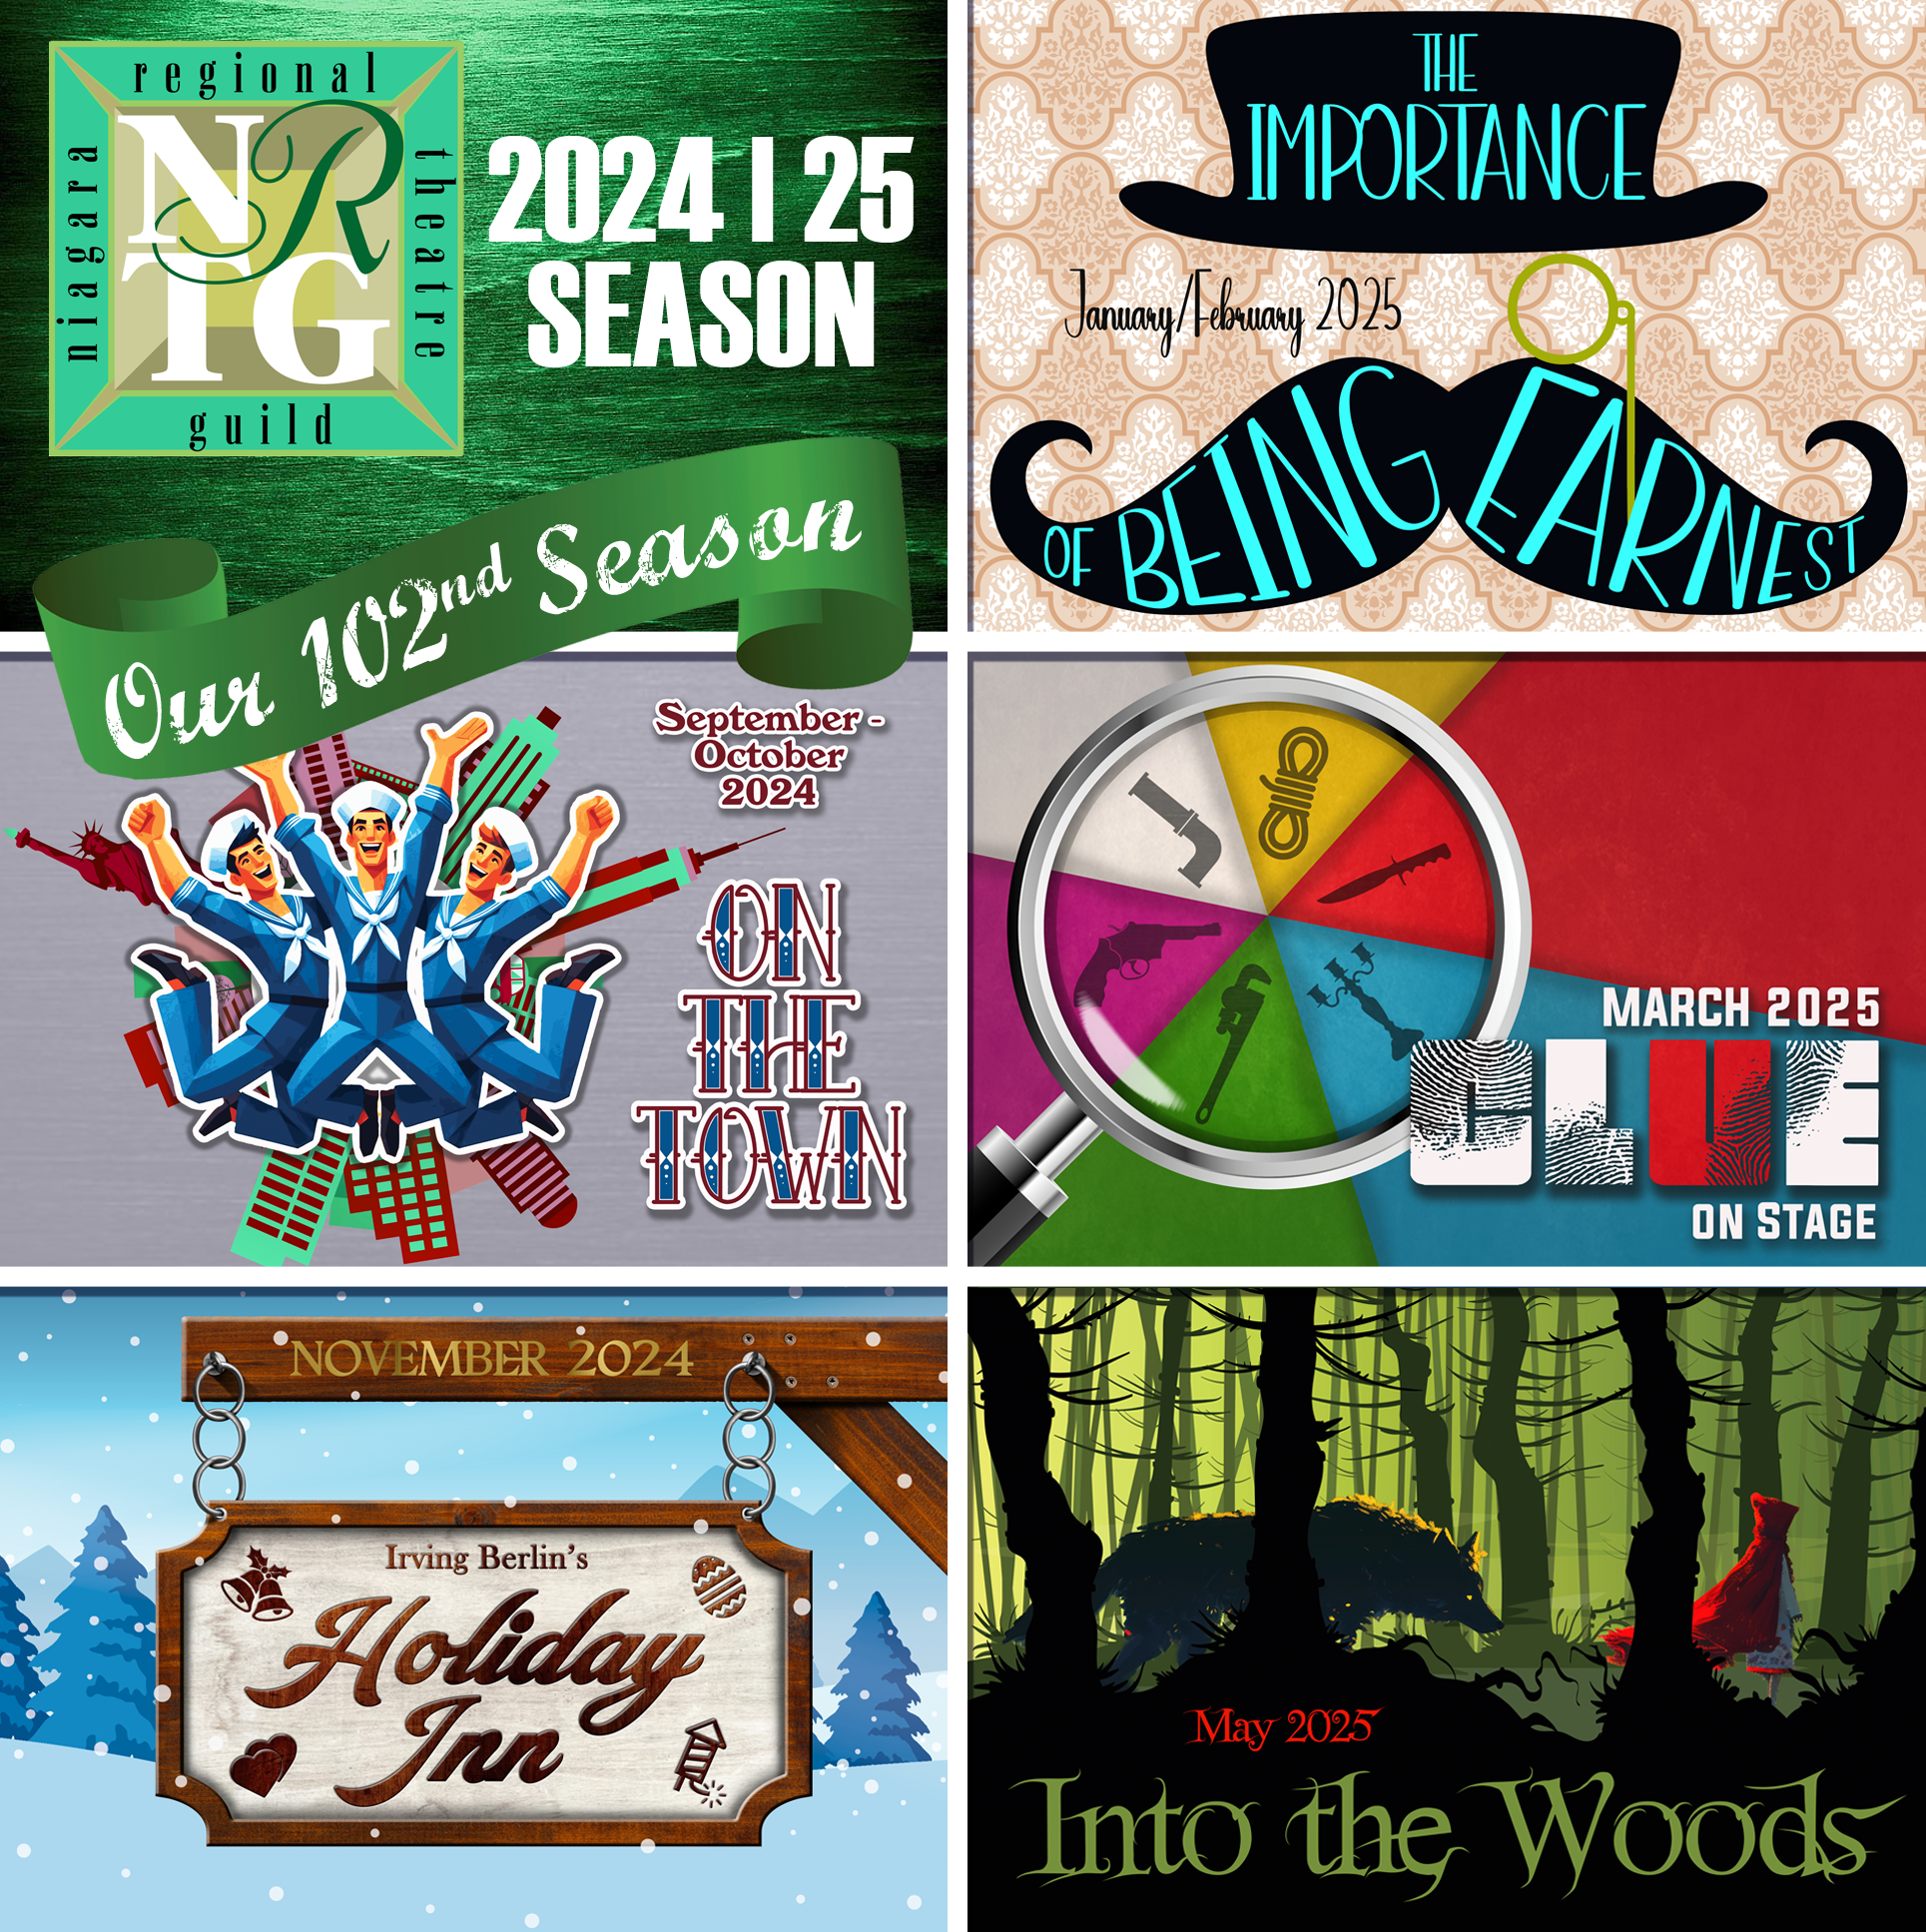 The 2024-25 NRTG Season: (1) On the Town, September/October 2024; (2) Holiday Inn, November 2024; (3) The Importance of Being Earnest, January/February 2025; (4) Clue On Stage, March 2025; (5) Into the Woods, May 2025